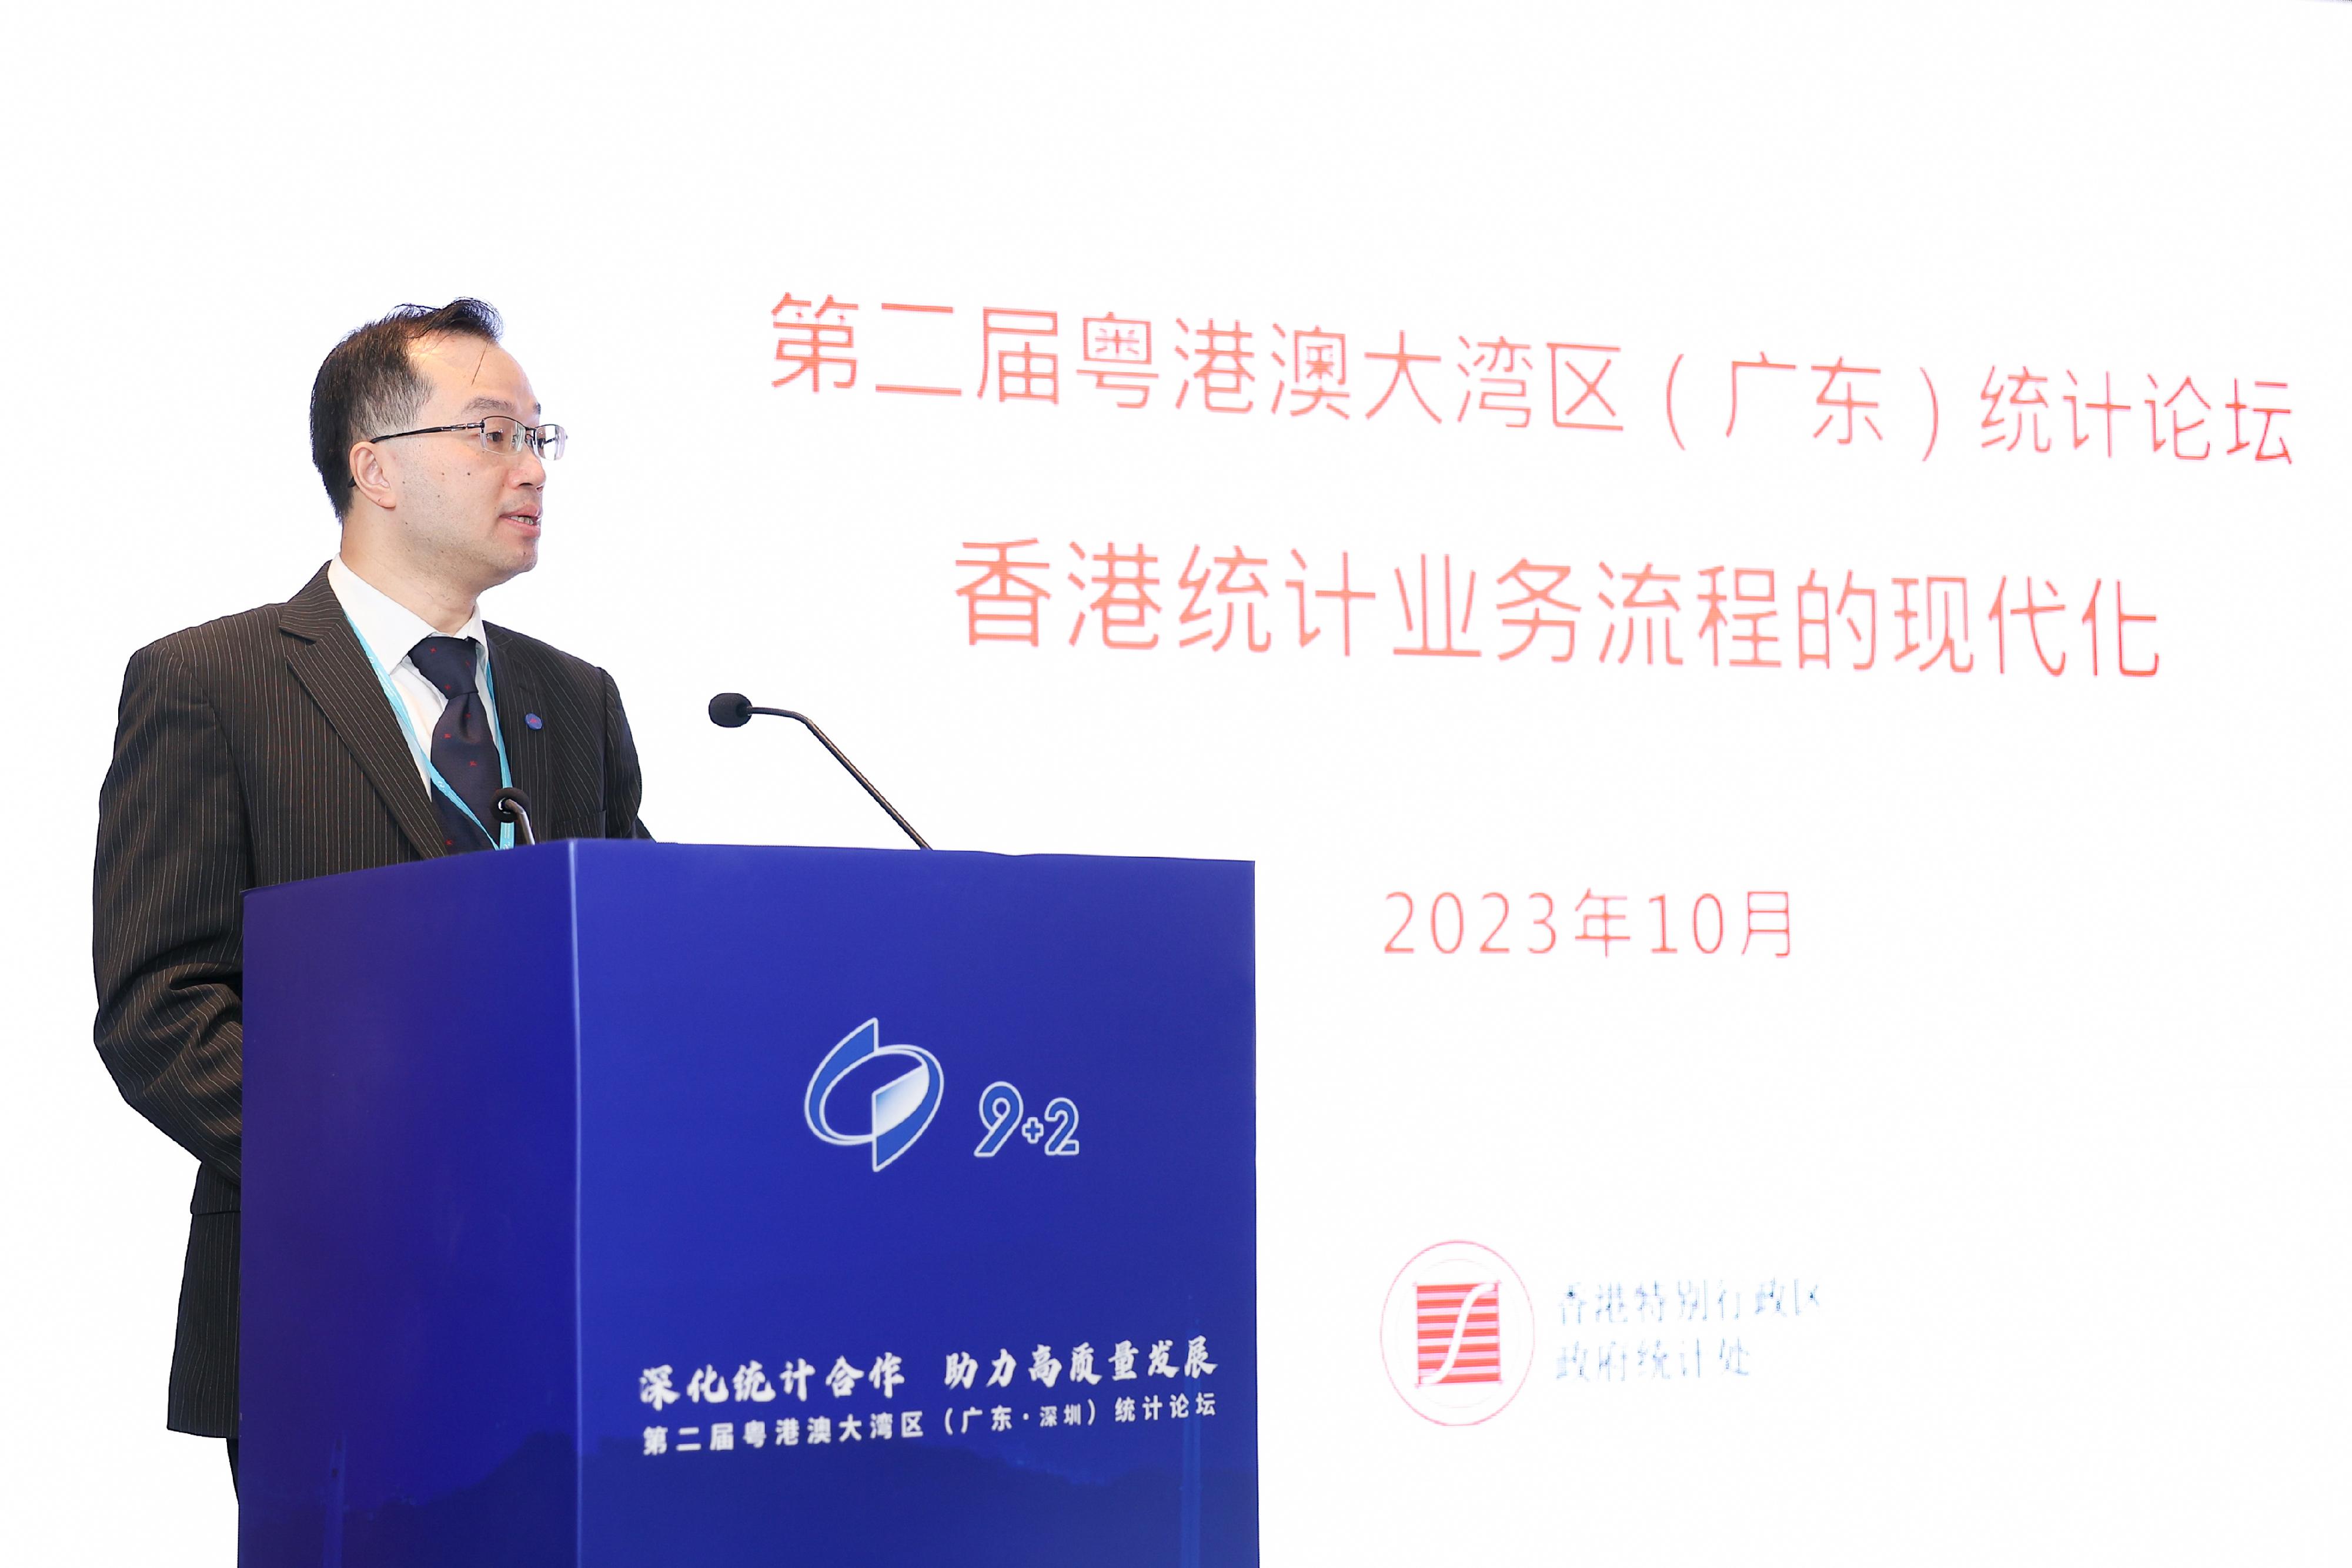 Senior statistician of the Census and Statistics Department Mr Tsang Tat-shing delivered a presentation at one of the sessions of the Second Guangdong-Hong Kong-Macao Greater Bay Area (Guangdong) Statistical Forum on October 25.